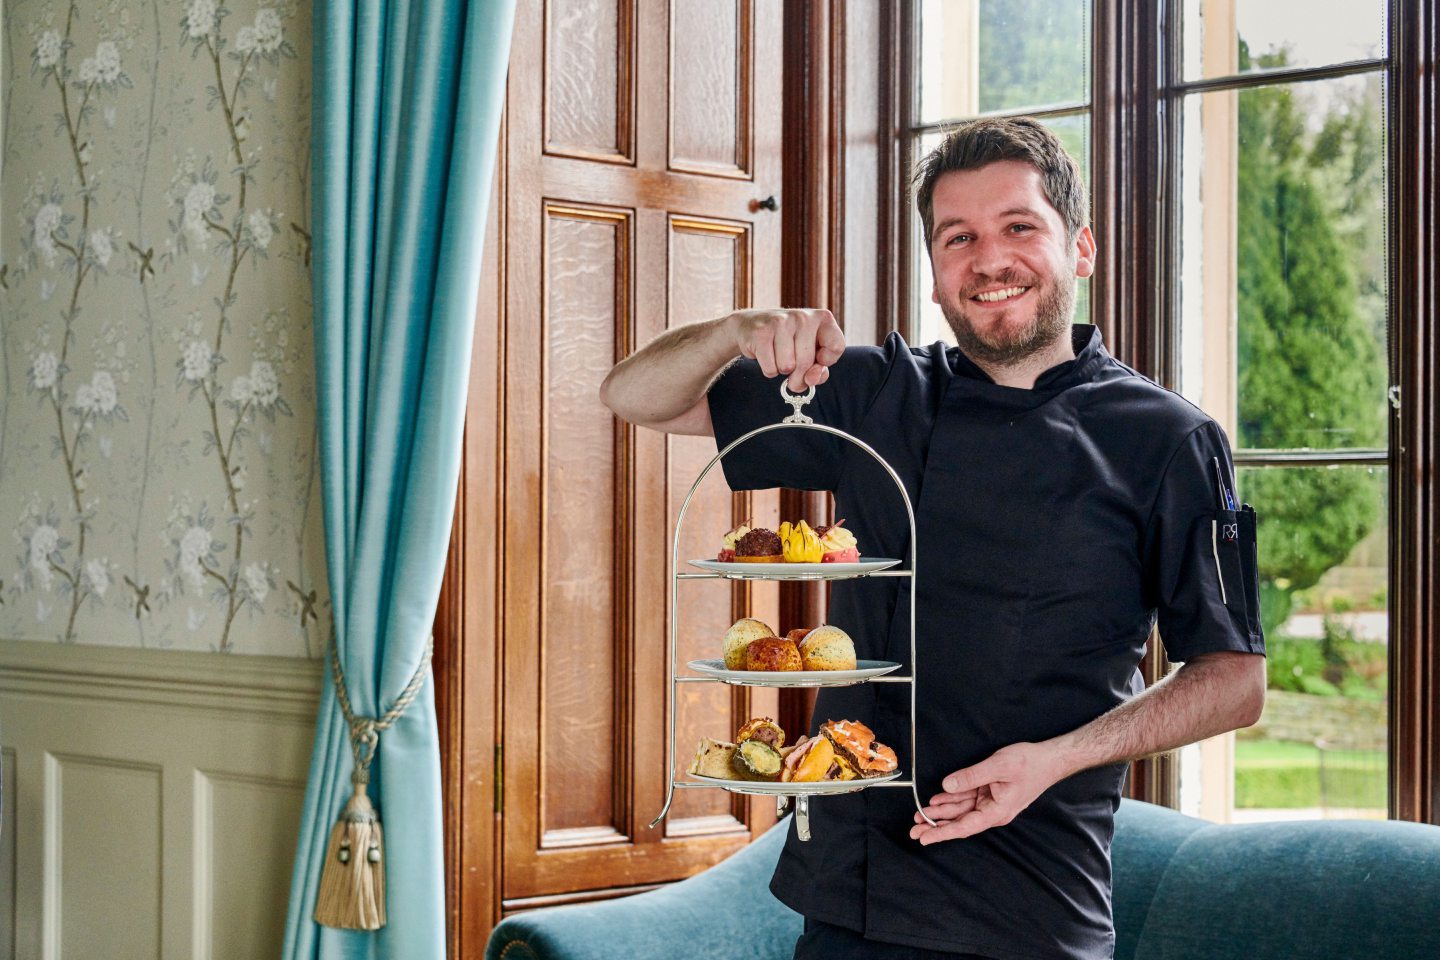 Maften Hall pastry chef presents the afternoon tea.